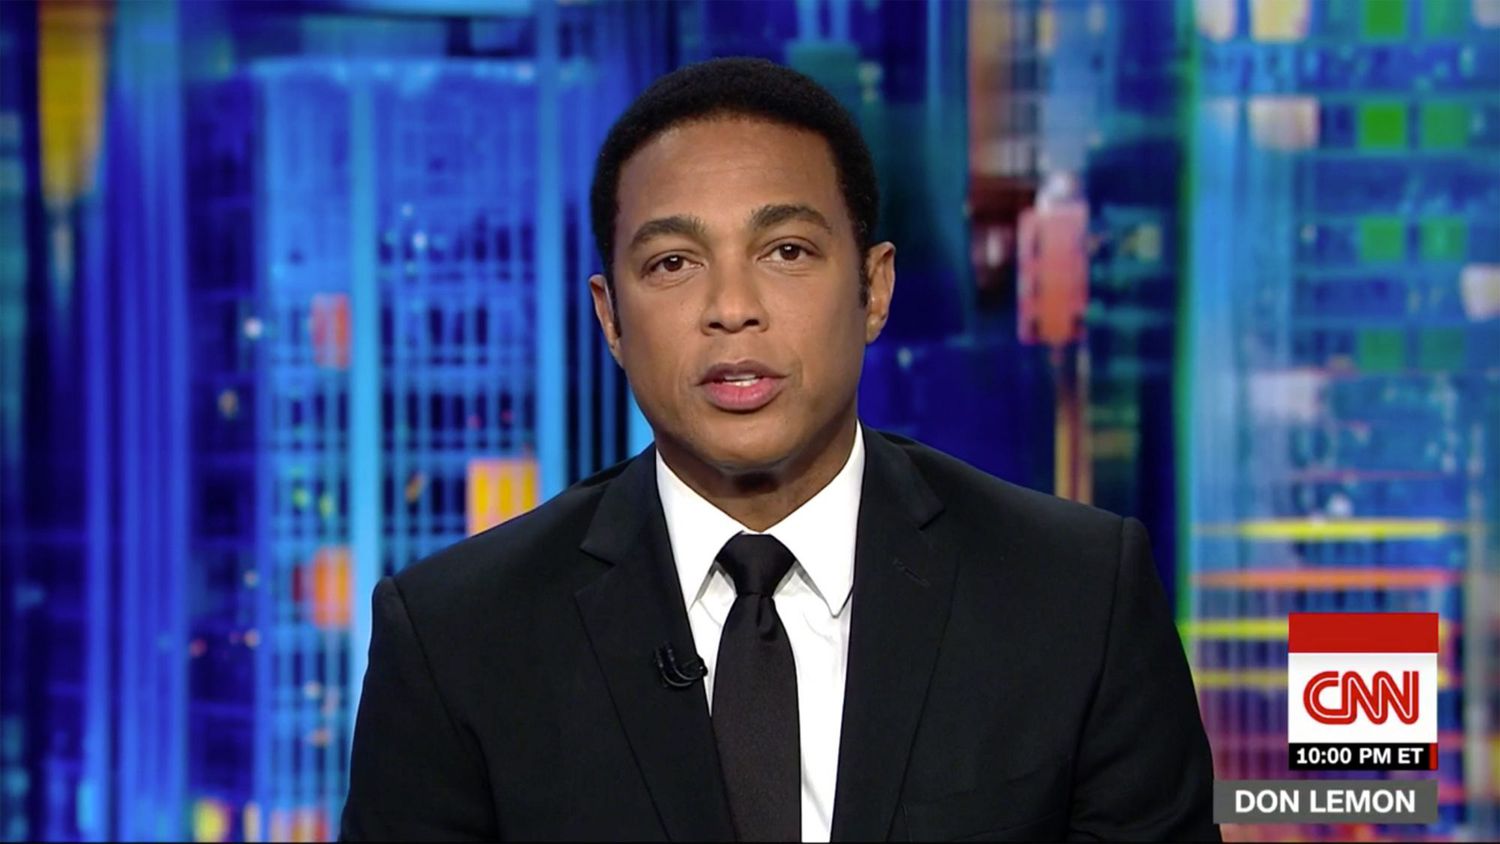 Don Lemon calls out celebrities for 'sitting in your mansions and doing nothing' amid protests - Entertainment Weekly